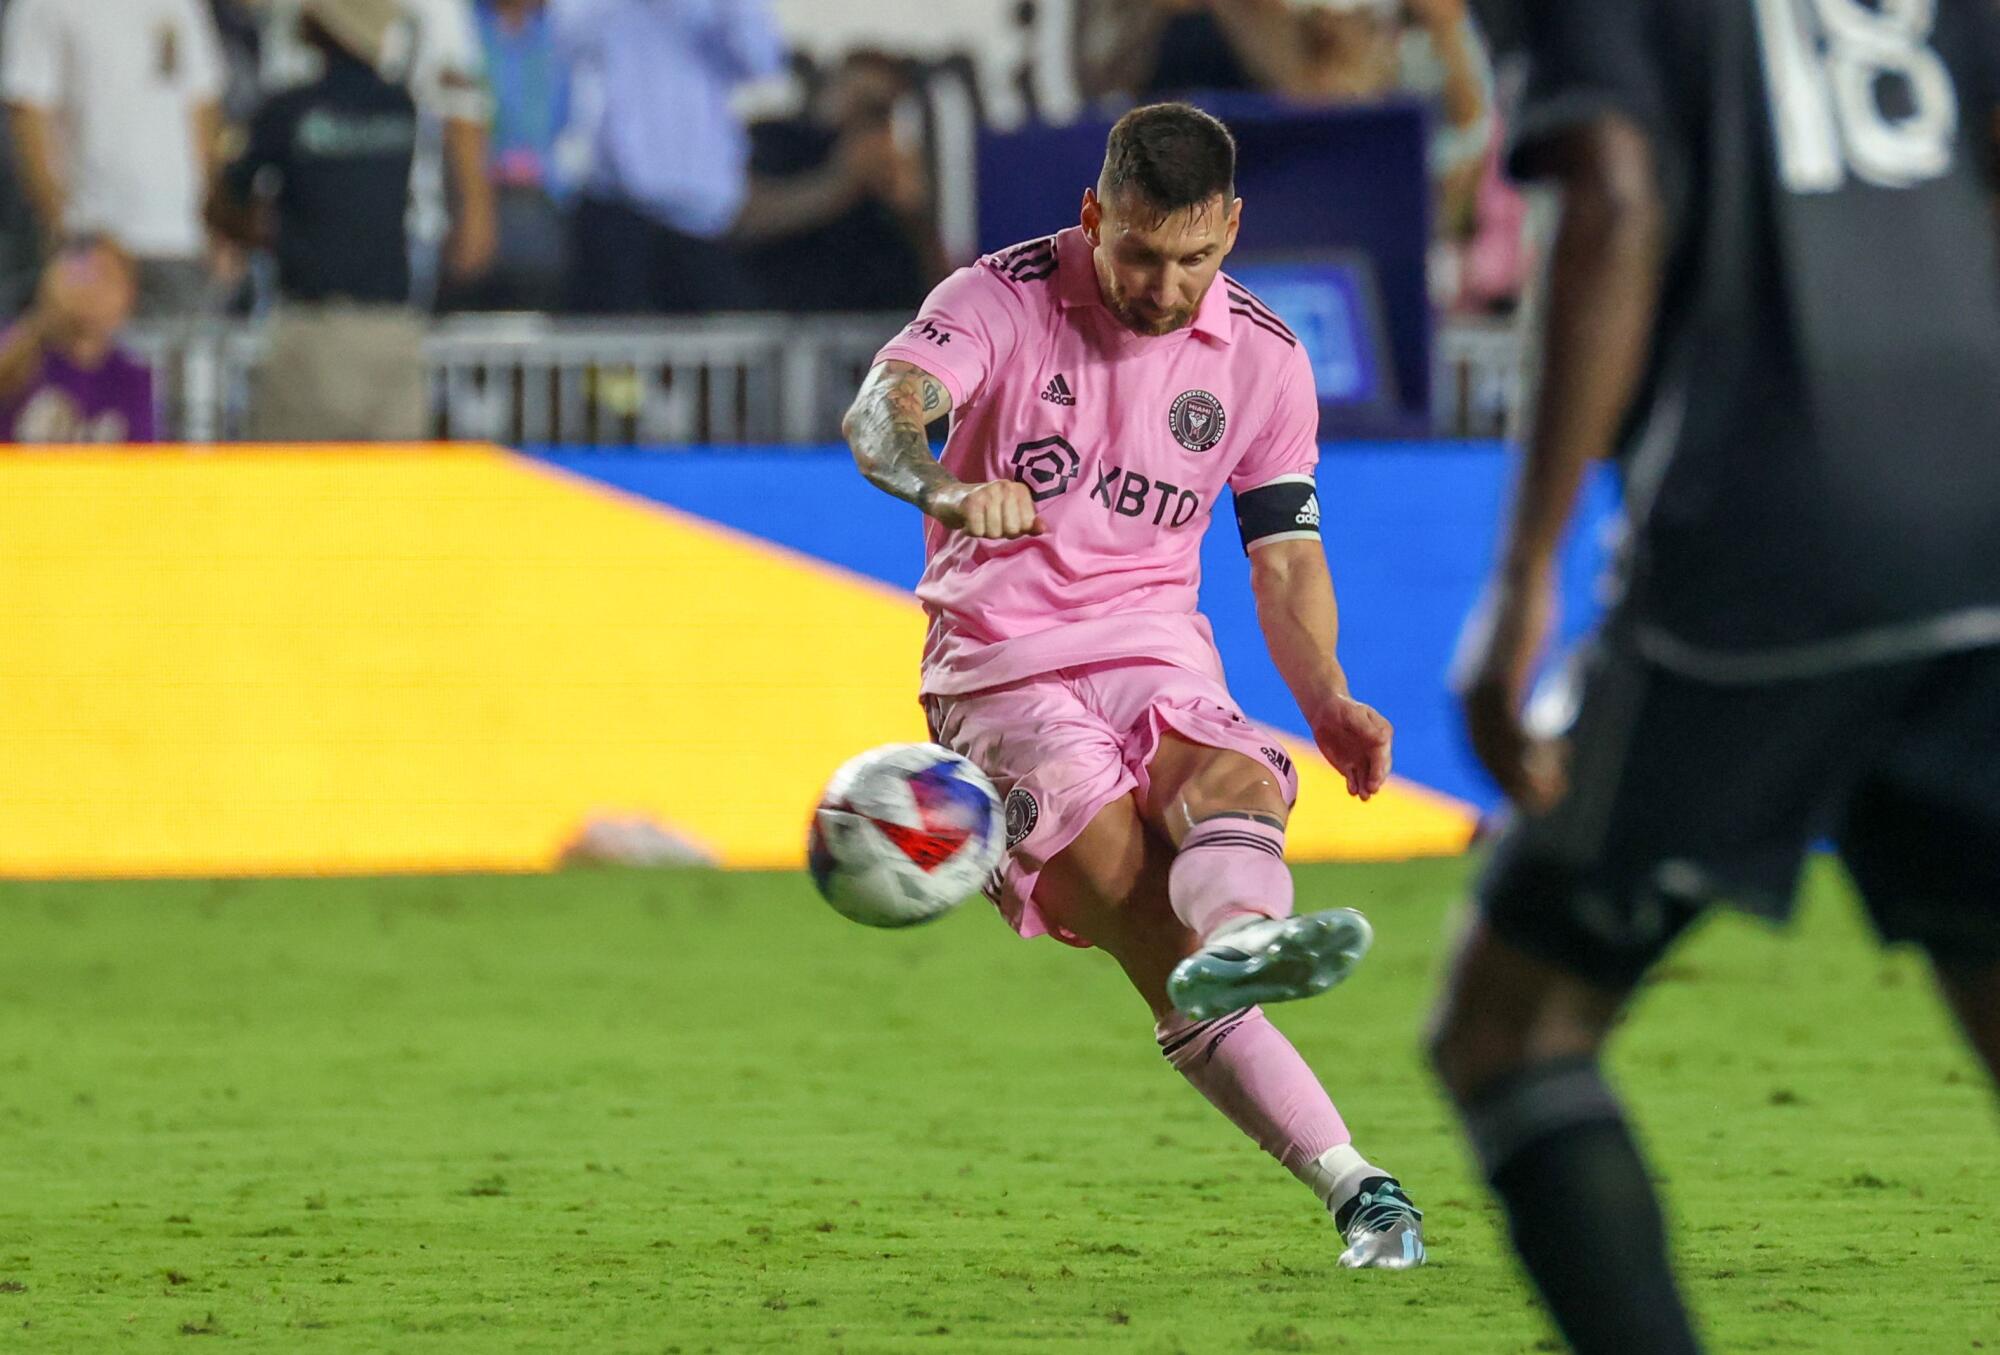 Inter Miami's Lionel Messi executes a free kick during an MLS game.